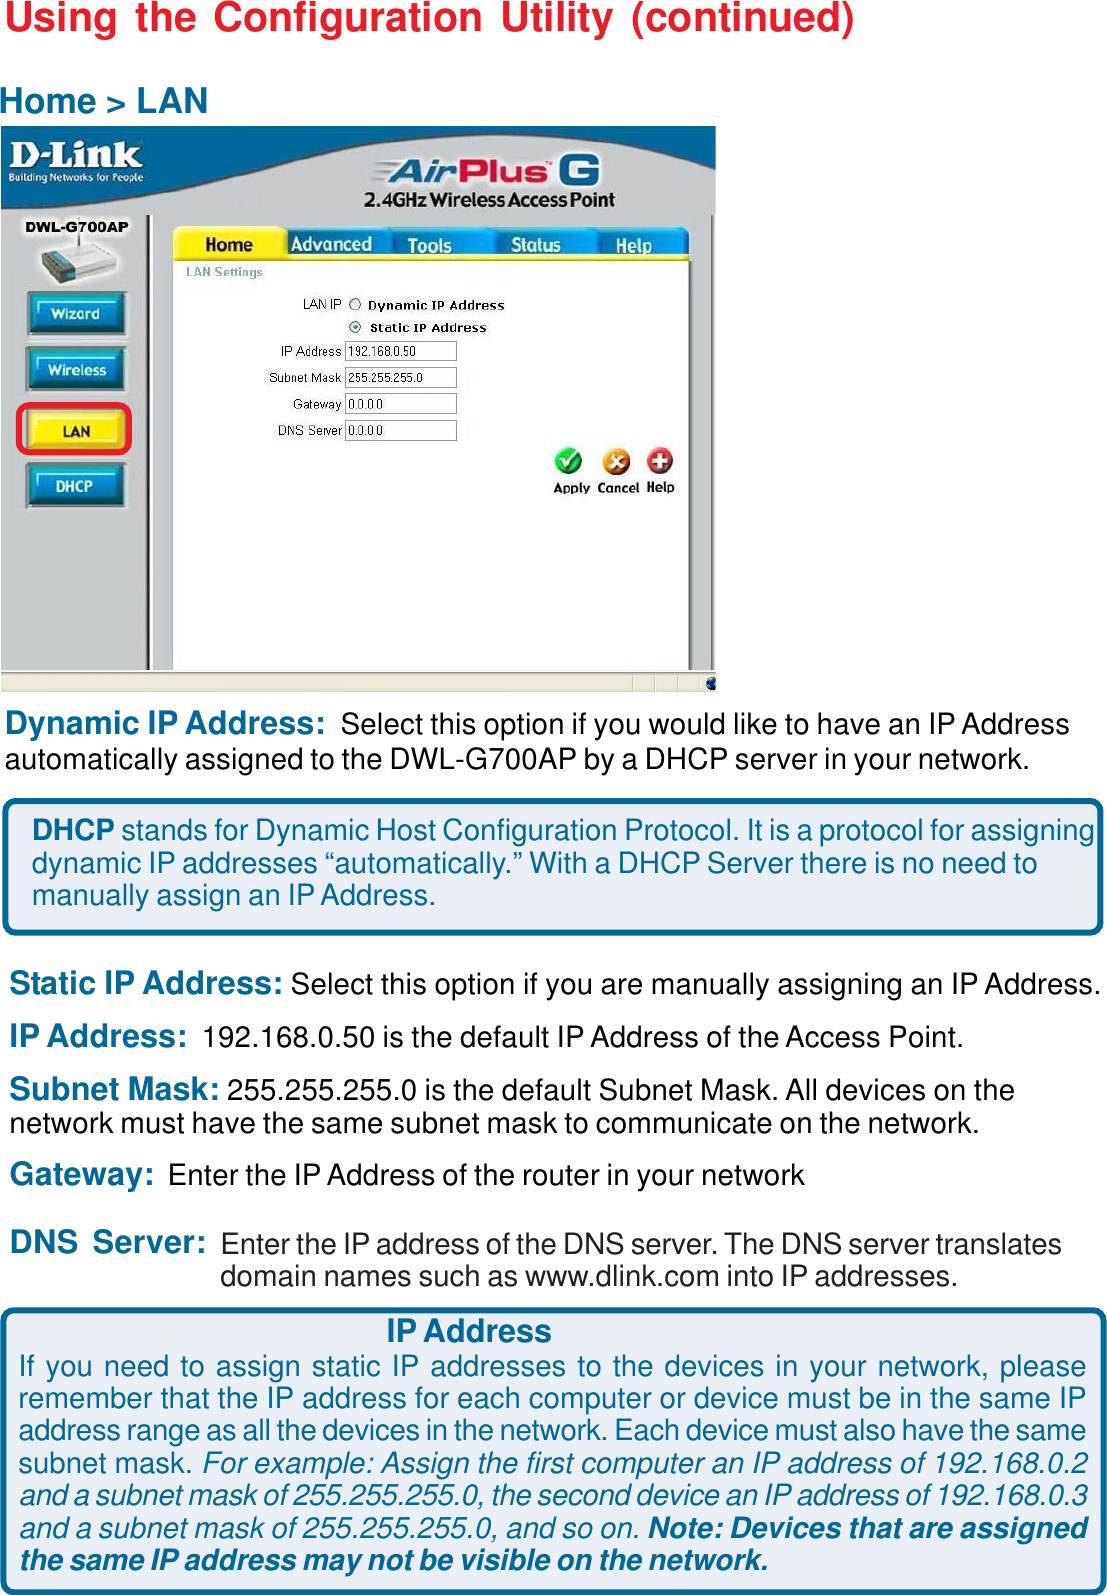 11Using the Configuration Utility (continued)Dynamic IP Address: Select this option if you would like to have an IP Addressautomatically assigned to the DWL-G700AP by a DHCP server in your network.DHCP stands for Dynamic Host Configuration Protocol. It is a protocol for assigningdynamic IP addresses “automatically.” With a DHCP Server there is no need tomanually assign an IP Address.Static IP Address: Select this option if you are manually assigning an IP Address.IP Address:  192.168.0.50 is the default IP Address of the Access Point.Subnet Mask: 255.255.255.0 is the default Subnet Mask. All devices on thenetwork must have the same subnet mask to communicate on the network.Gateway: Enter the IP Address of the router in your networkDNS Server:Home &gt; LANIP AddressIf you need to assign static IP addresses to the devices in your network, pleaseremember that the IP address for each computer or device must be in the same IPaddress range as all the devices in the network. Each device must also have the samesubnet mask. For example: Assign the first computer an IP address of 192.168.0.2and a subnet mask of 255.255.255.0, the second device an IP address of 192.168.0.3and a subnet mask of 255.255.255.0, and so on. Note: Devices that are assignedthe same IP address may not be visible on the network.Enter the IP address of the DNS server. The DNS server translatesdomain names such as www.dlink.com into IP addresses.